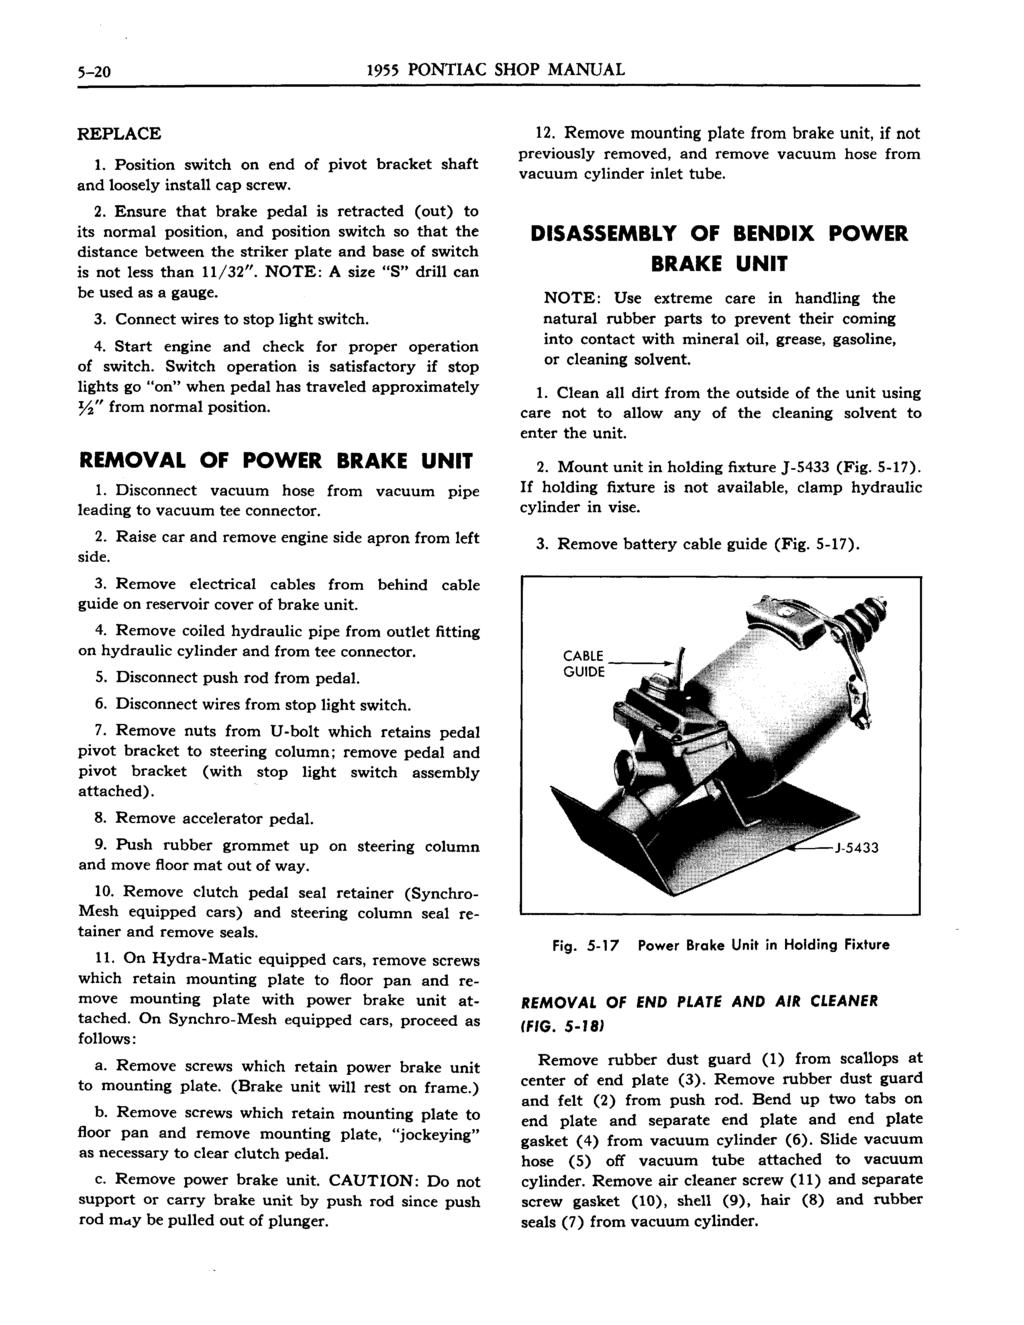 5-20 1955 PONTIAC SHOP MANUAL REPLACE 1. Position switch on end of pivot bracket shaft and loosely install cap screw. 2.